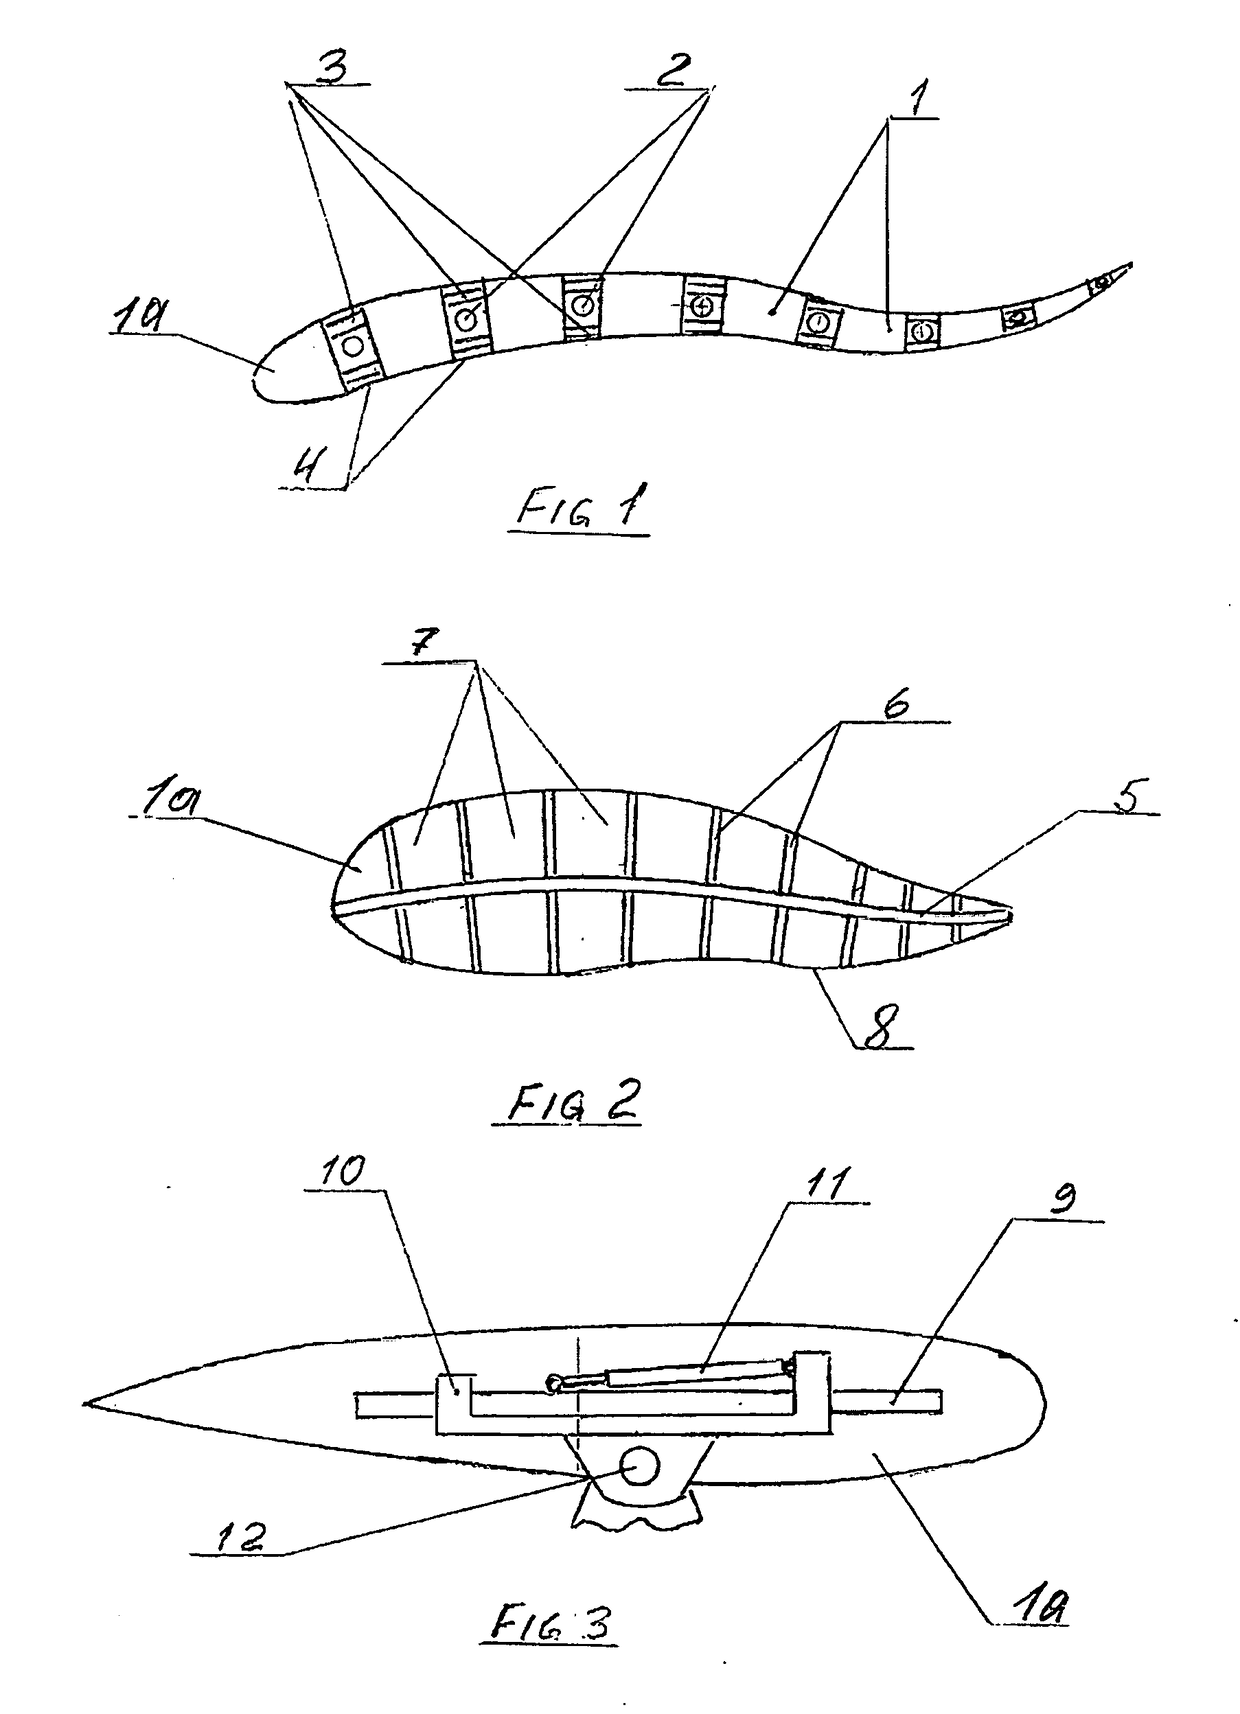 Rotor or propeller blade with dynamically variable geometry and other properties